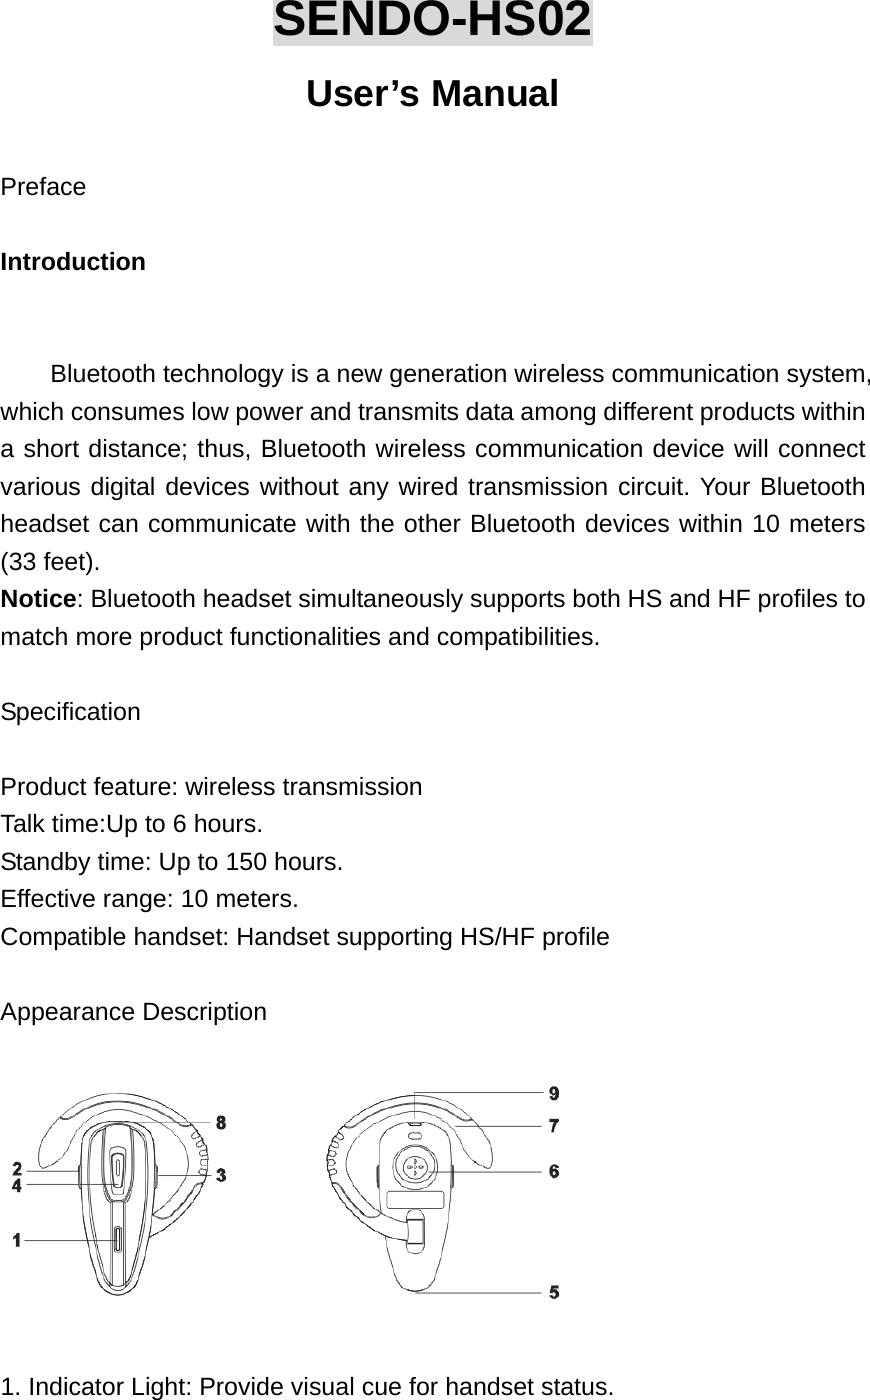 SENDO-HS02 User’s Manual  Preface  Introduction  !Bluetooth technology is a new generation wireless communication system, which consumes low power and transmits data among different products within a short distance; thus, Bluetooth wireless communication device will connect various digital devices without any wired transmission circuit. Your Bluetooth headset can communicate with the other Bluetooth devices within 10 meters (33 feet). Notice: Bluetooth headset simultaneously supports both HS and HF profiles to match more product functionalities and compatibilities.    Specification  Product feature: wireless transmission Talk time:Up to 6 hours. Standby time: Up to 150 hours. Effective range: 10 meters. Compatible handset: Handset supporting HS/HF profile  Appearance Description  !!1. Indicator Light: Provide visual cue for handset status. 